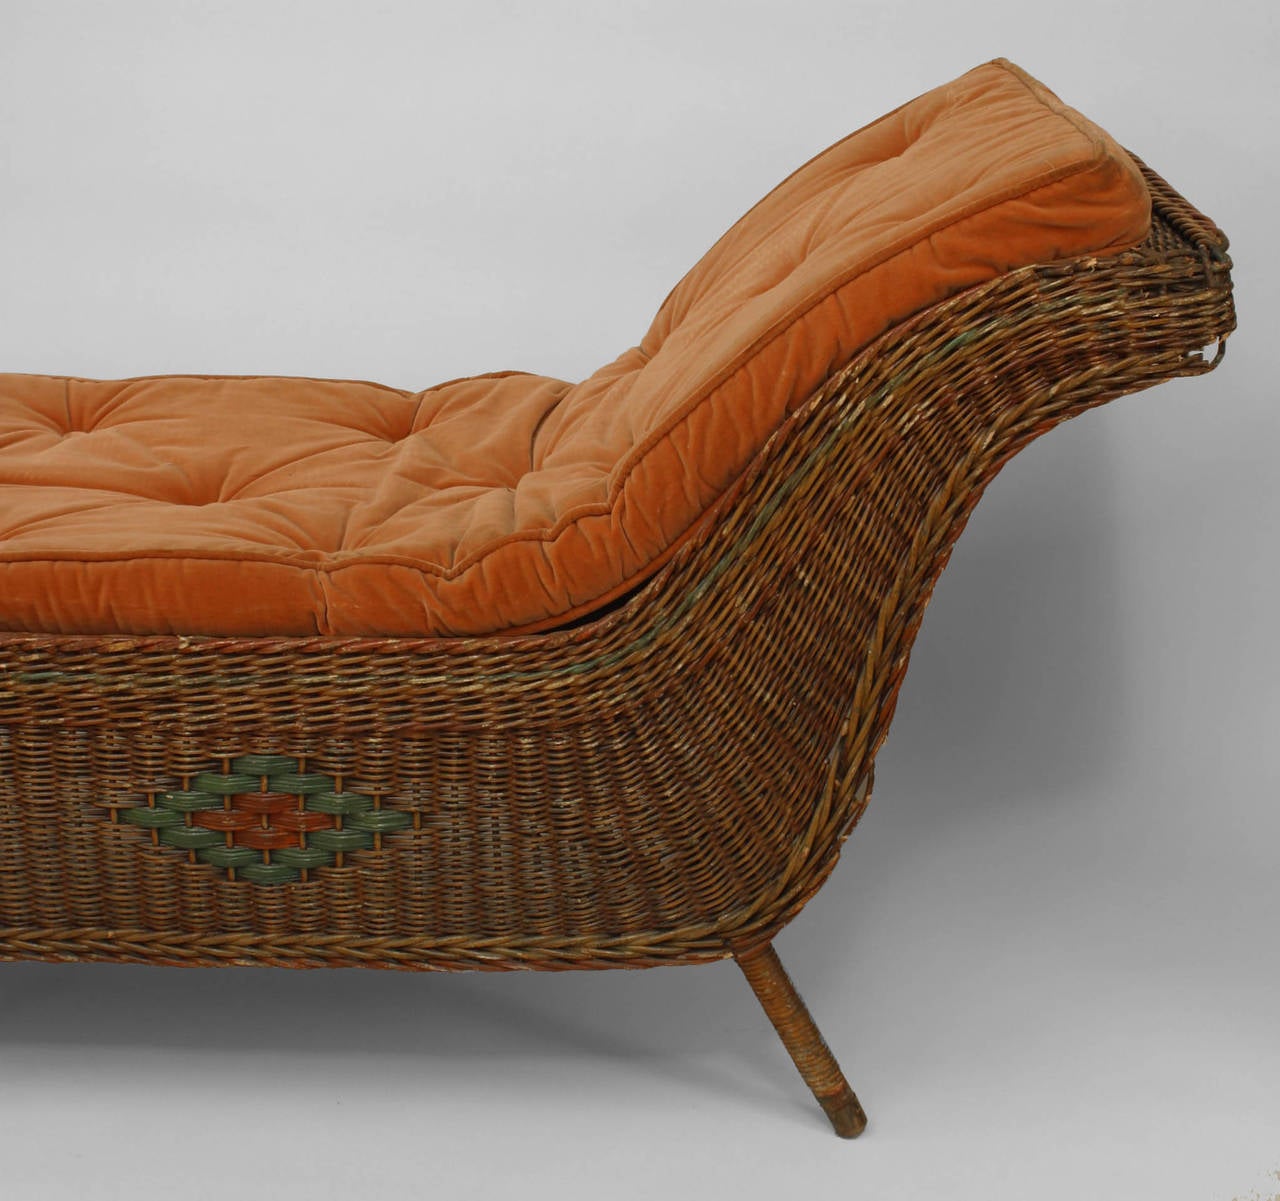 American Art Deco natural wicker backless recamier with red and green
painted trim (as is).